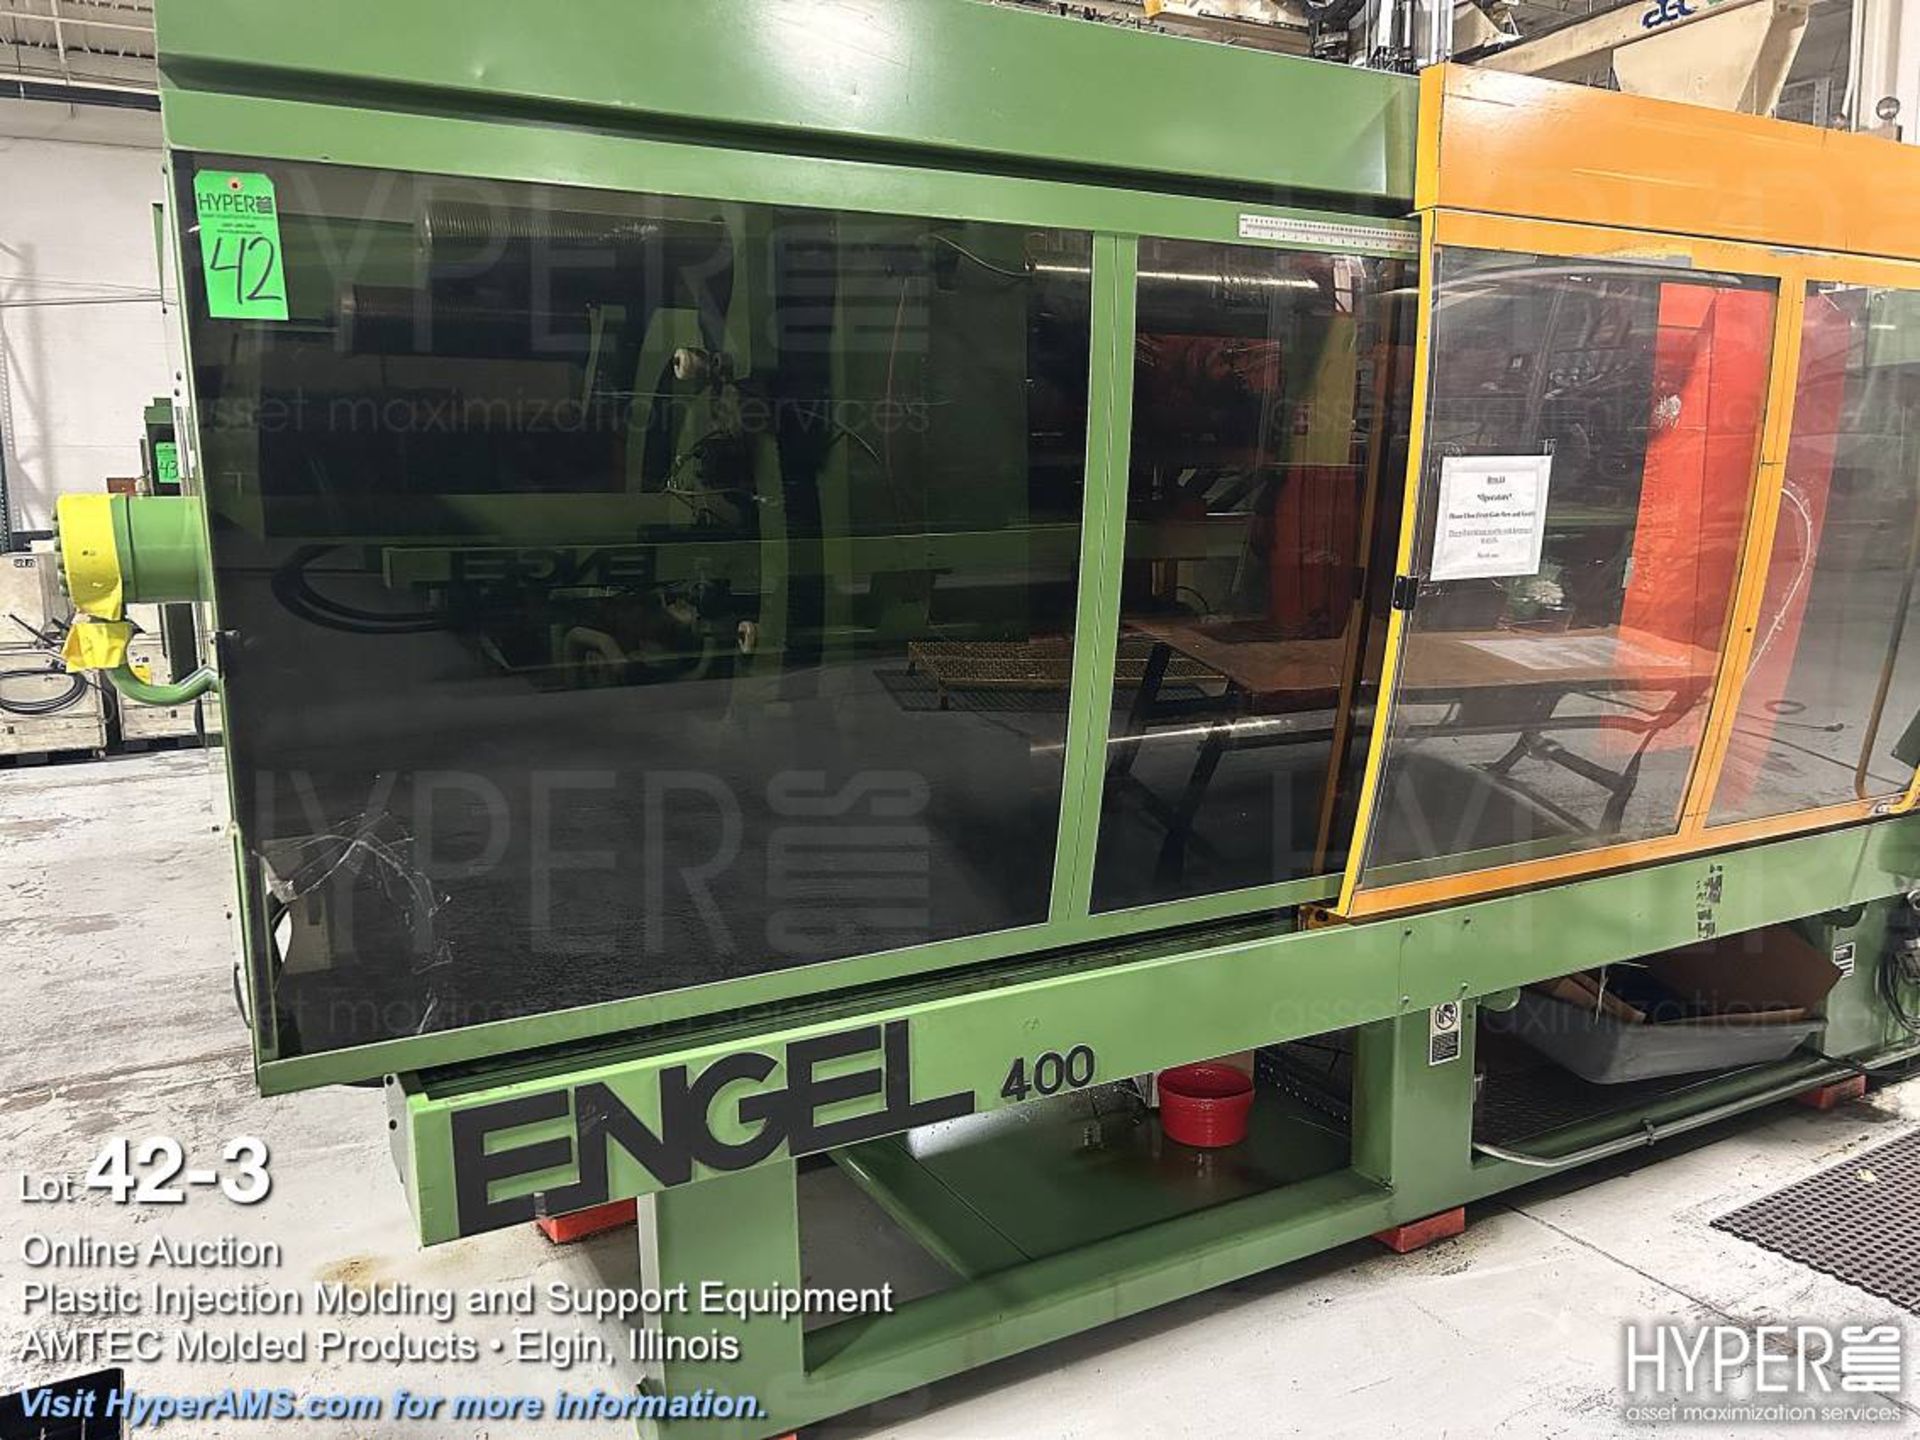 Engel ES2050/400AH toggle clamp plastic injection molding machine - Image 3 of 28